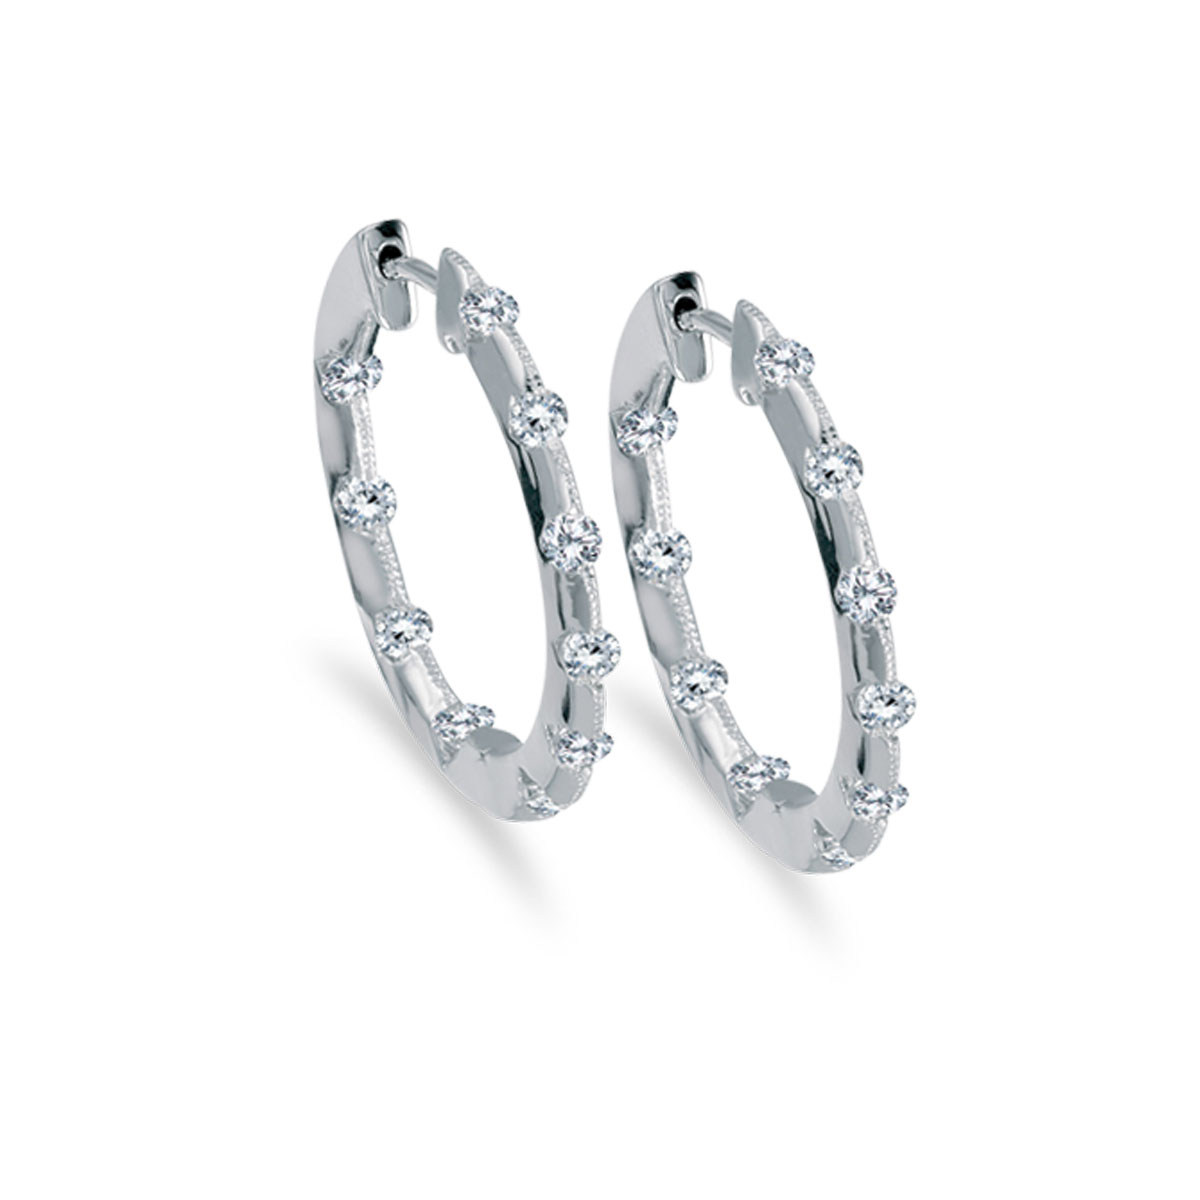 JCX2388: 19 mm diamond inside/outside hoop earrings in beautiful 14k white gold. The perfect look for day or night. .50 carat genuine diamonds.